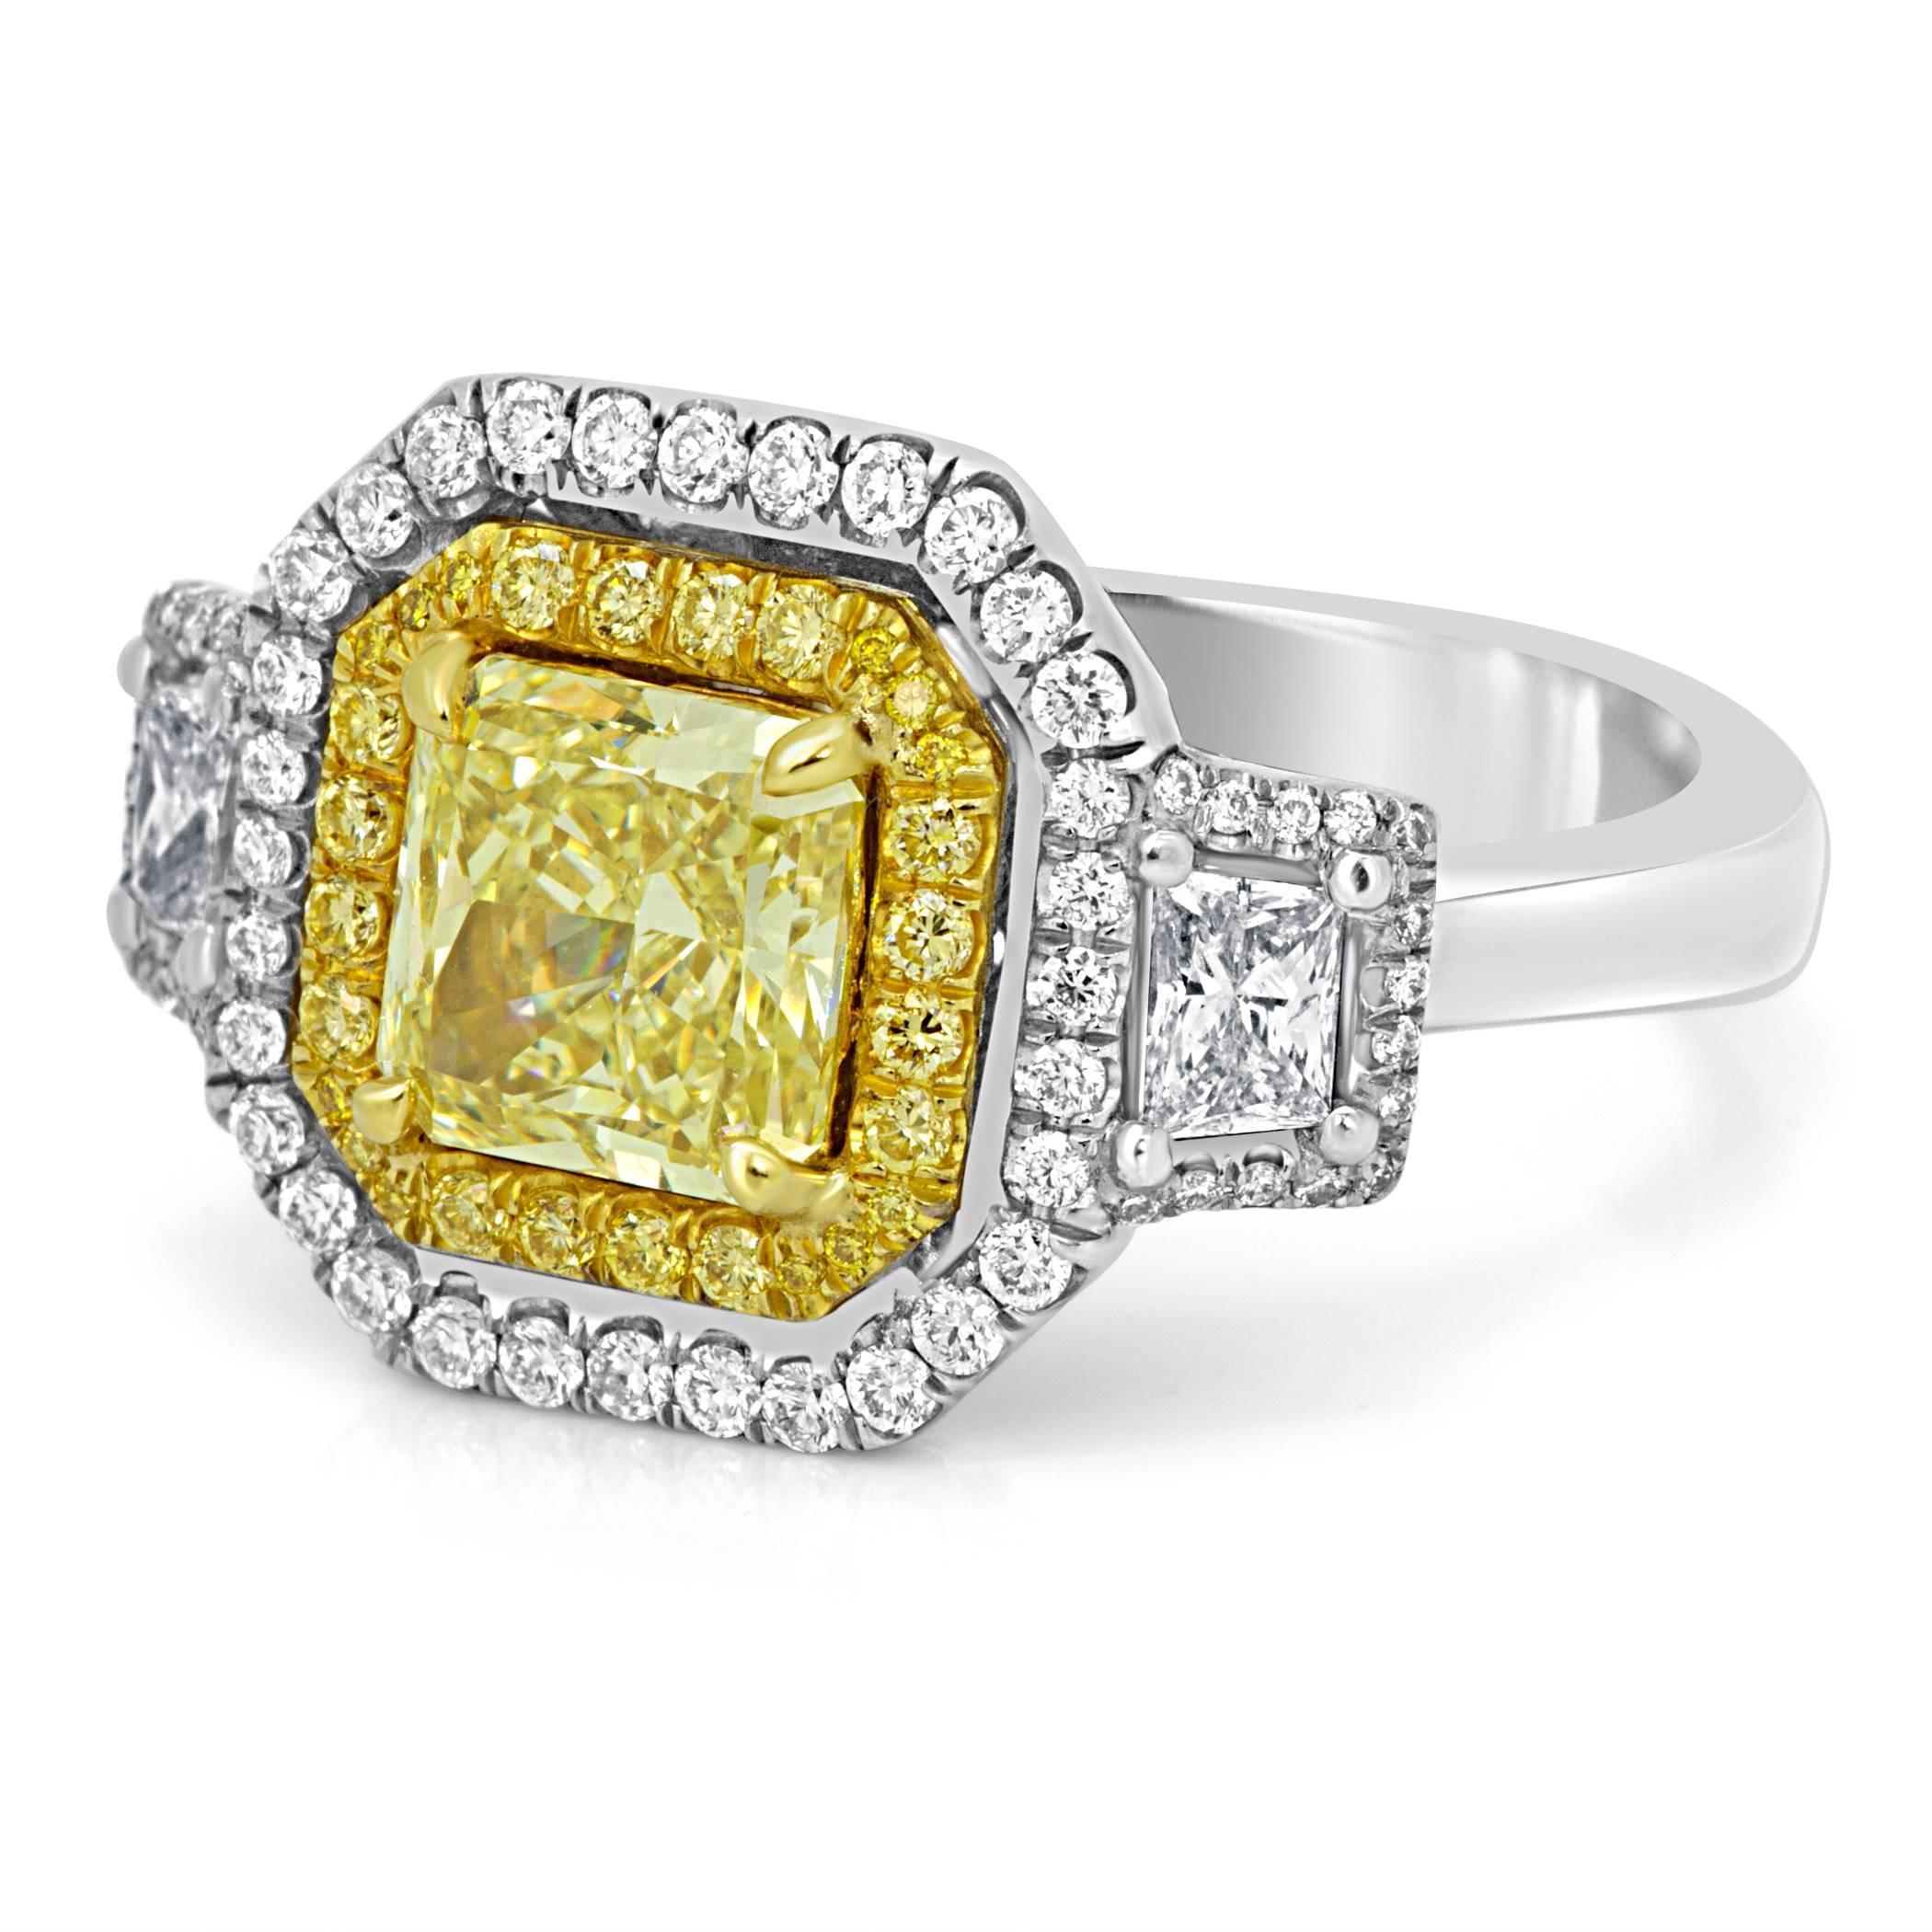 GIA certified fancy yellow Radiant cut VS2 Clarity diamond 1.63 carat encircled in double halo of natural fancy yellow diamond 0.23 carat and white diamond 0.41 carat flanked by two diamond Trapezoid 0.35 carat on the sides. In 18K white and yellow